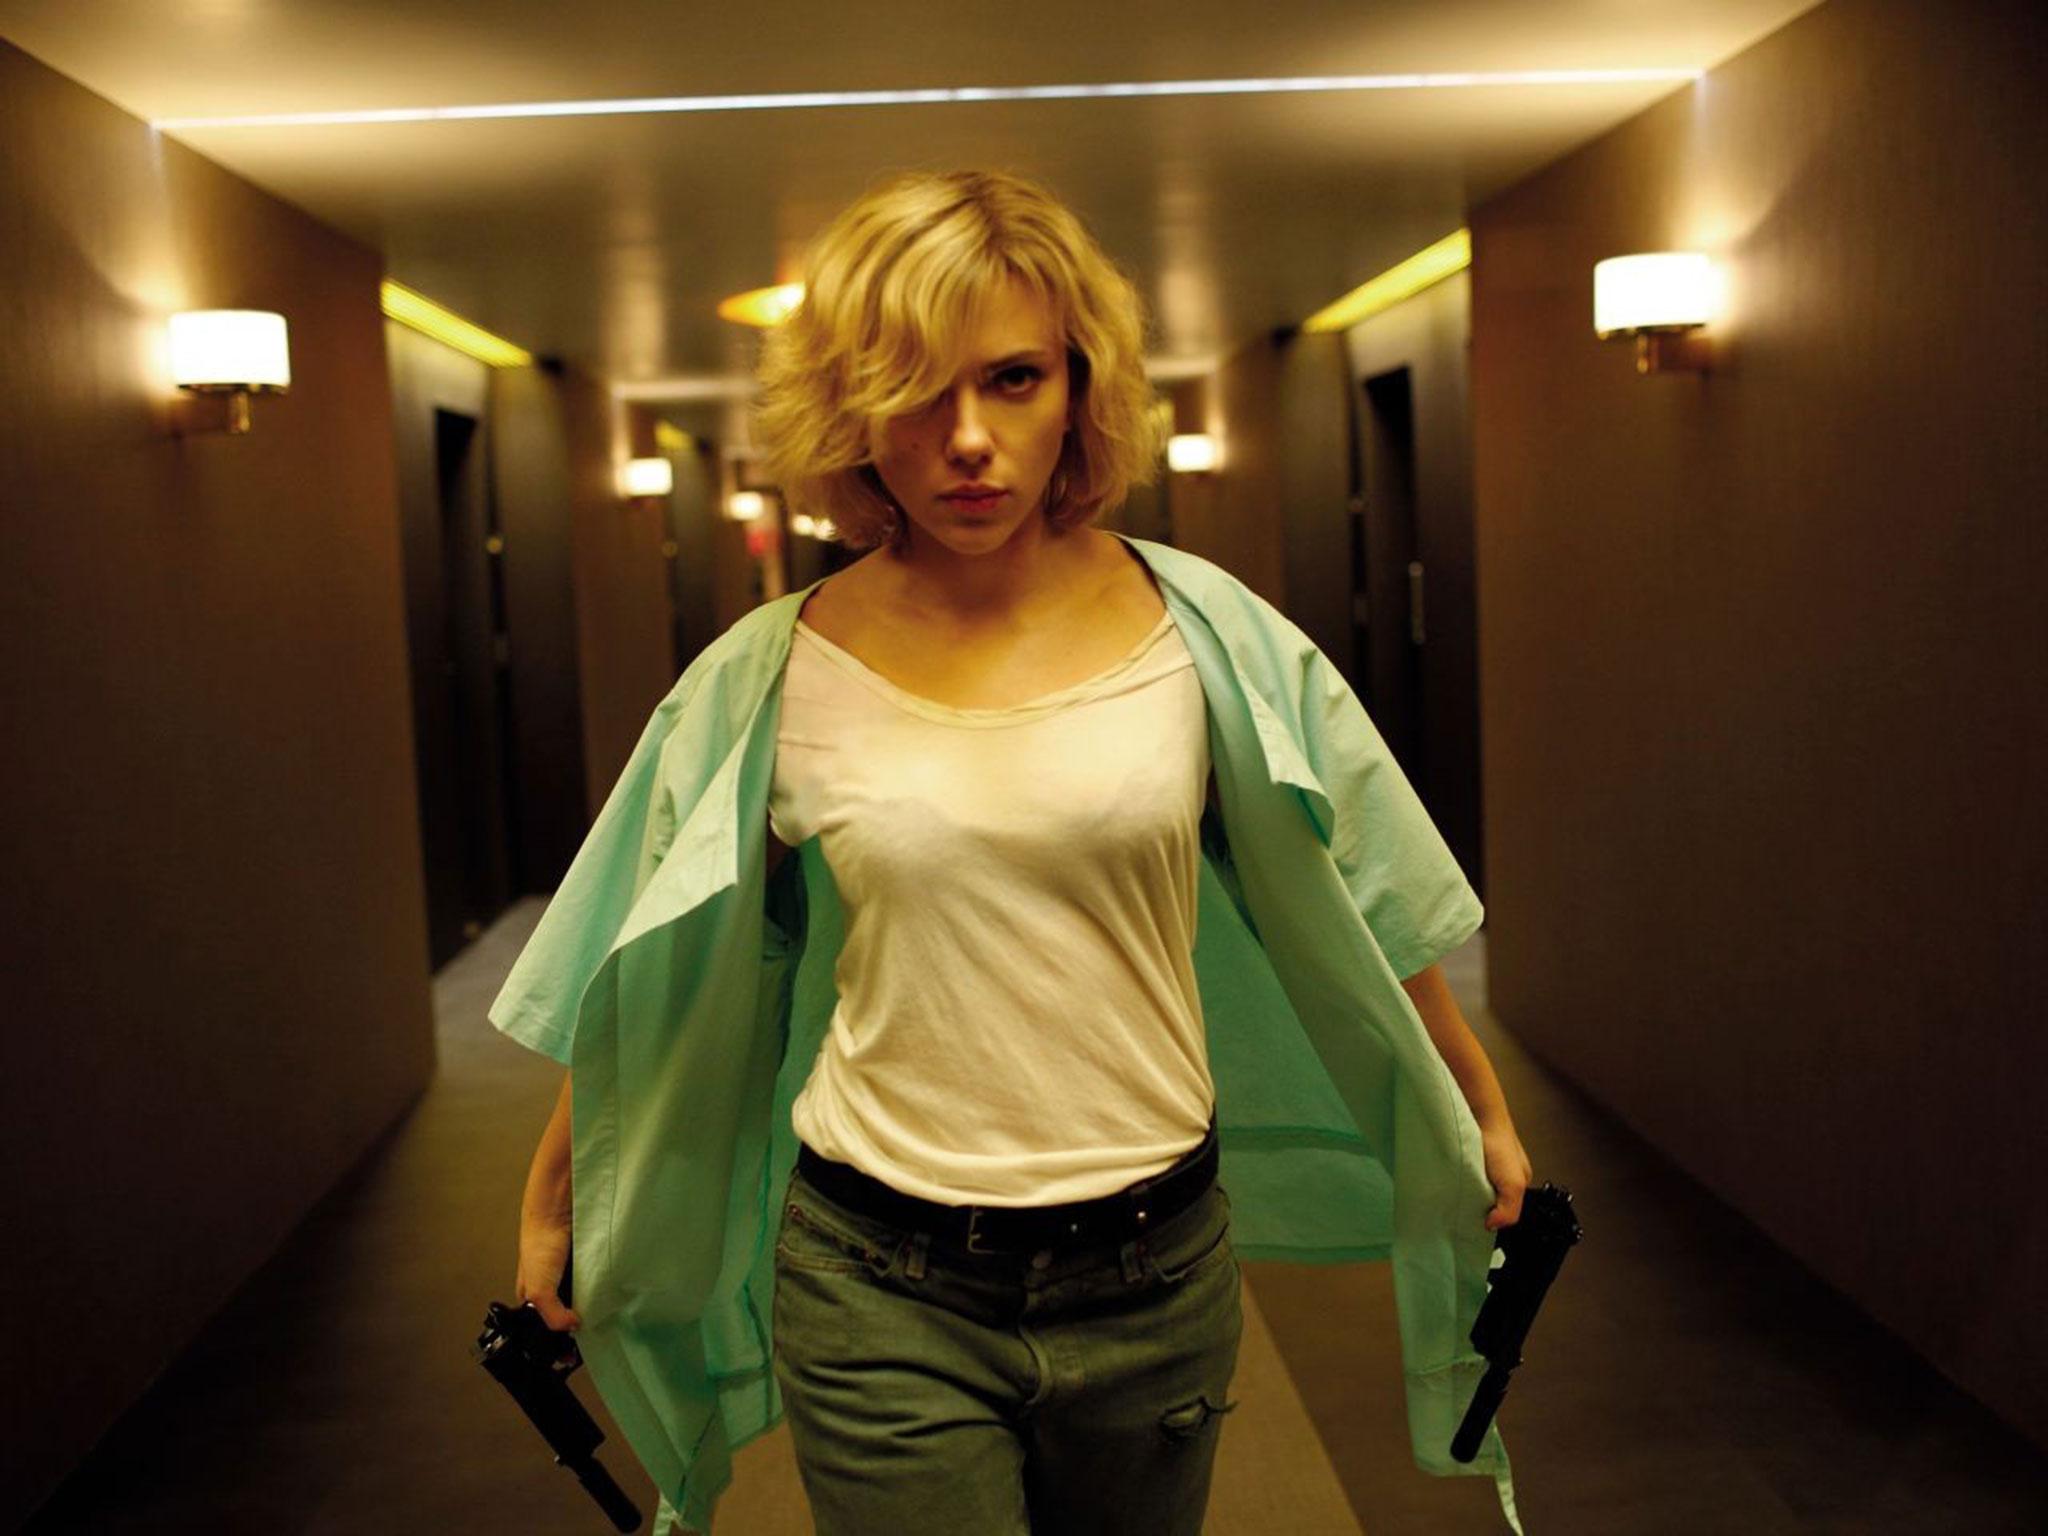 Loaded weapon:  drugs have surprise side effects for Scarlett Johansson in Luc Besson's 'Lucy'